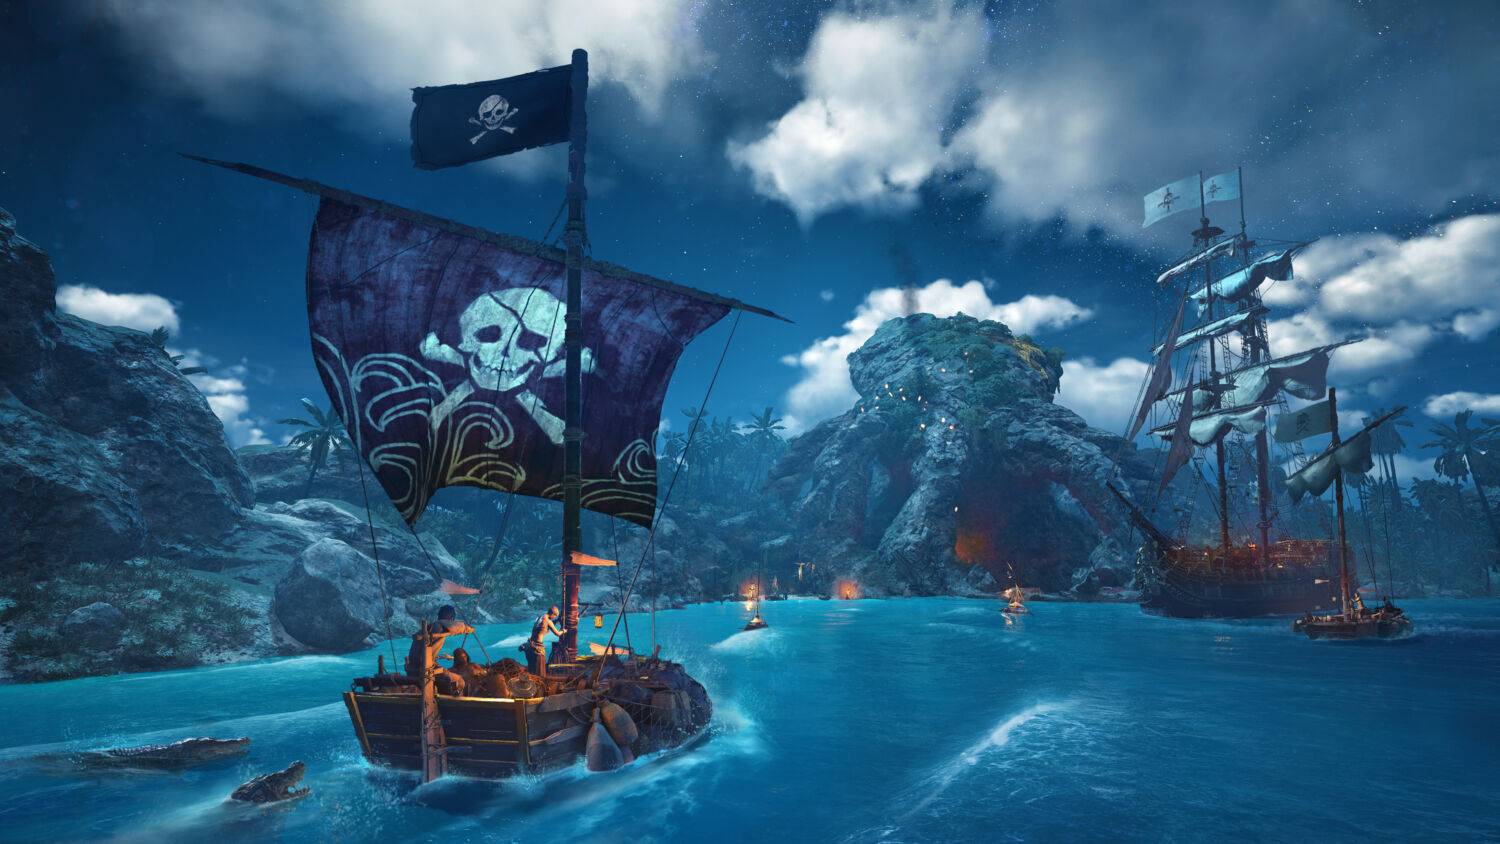 I Fought a HIDDEN GHOST SHIP in Skull and Bones Closed Beta 